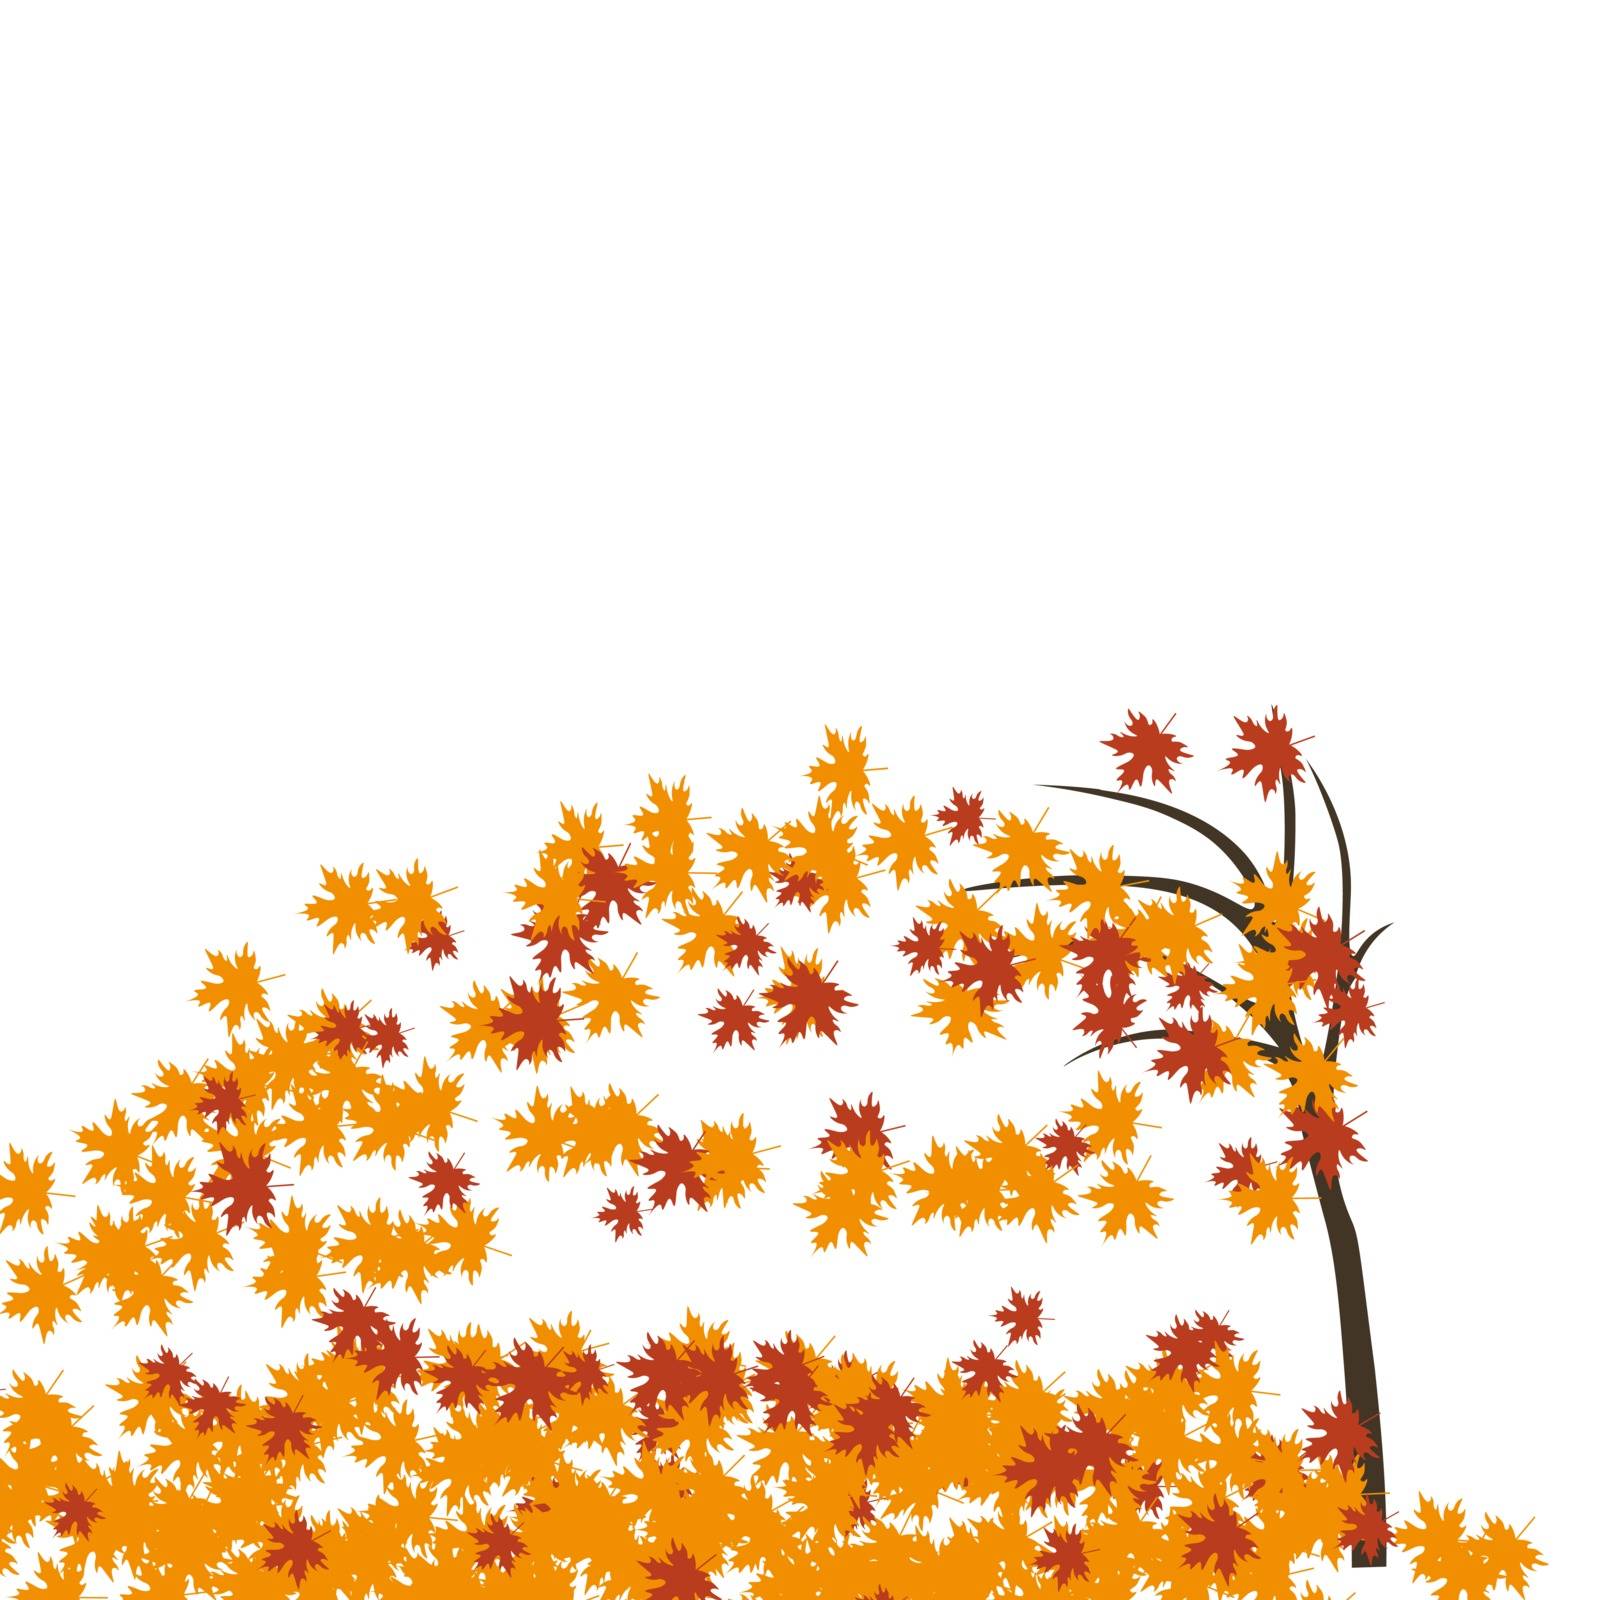 Maple tree in the wind, autumn. Fallen red and yellow leaves. Vector illustration by lilystudio